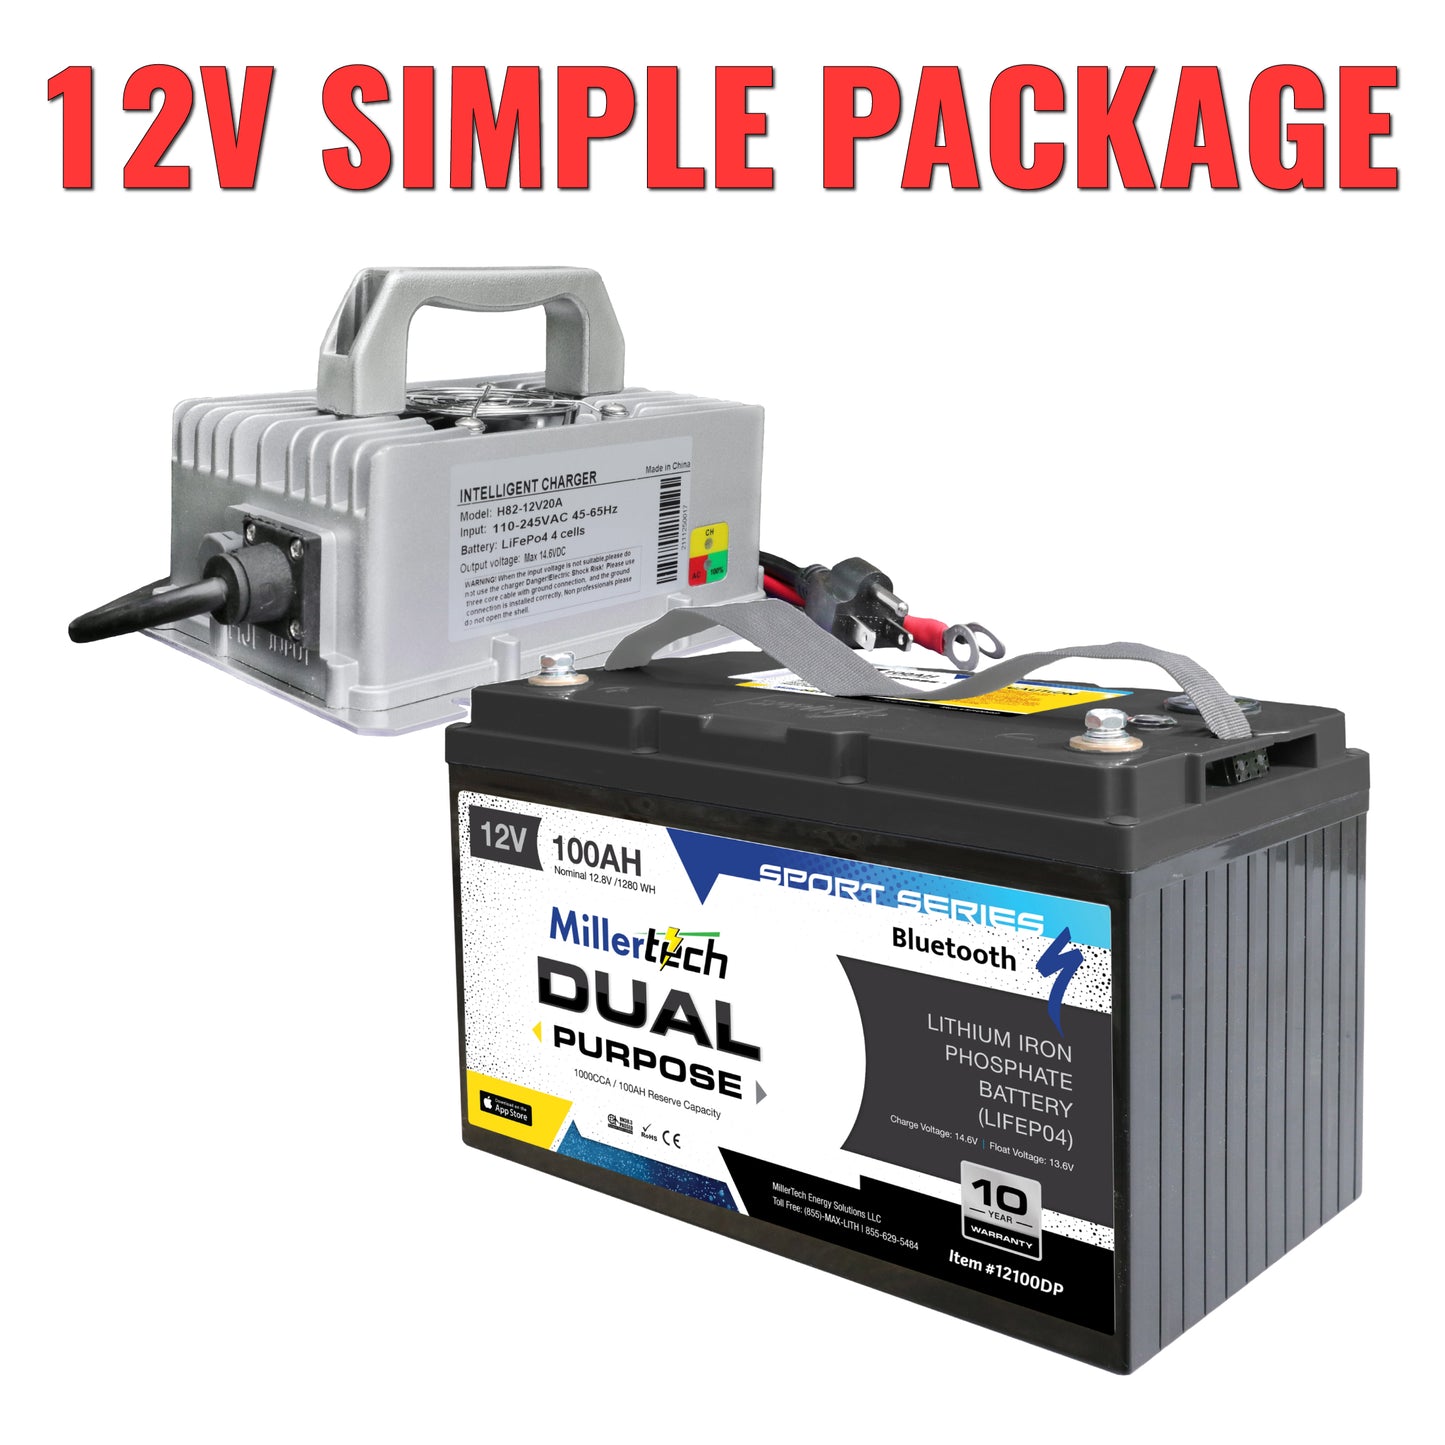 12V Simple Package